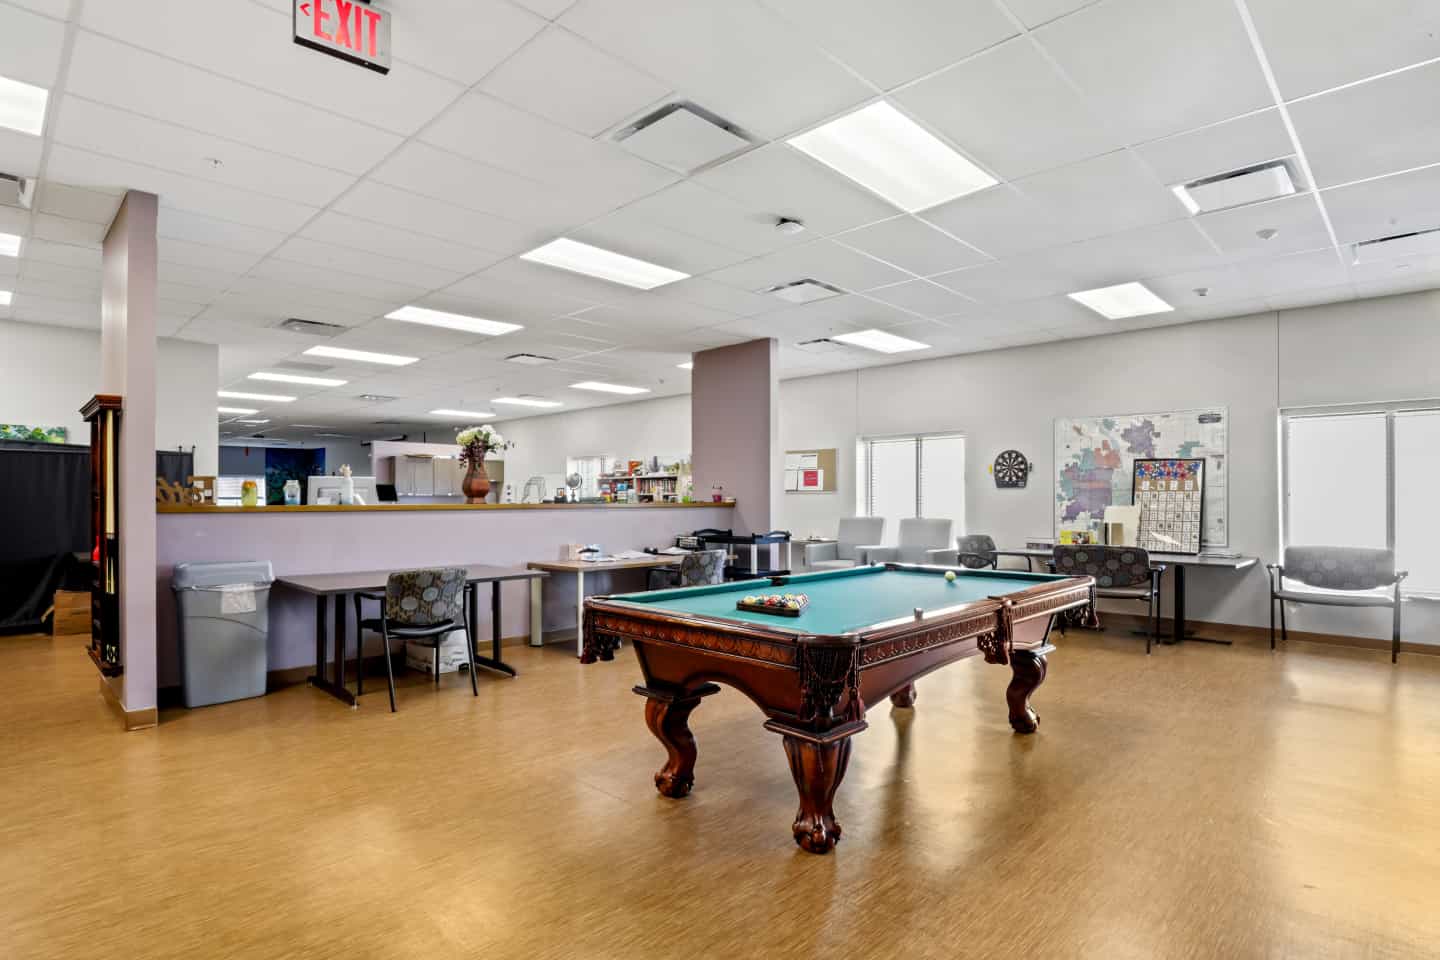 Activity Room - Pool Table